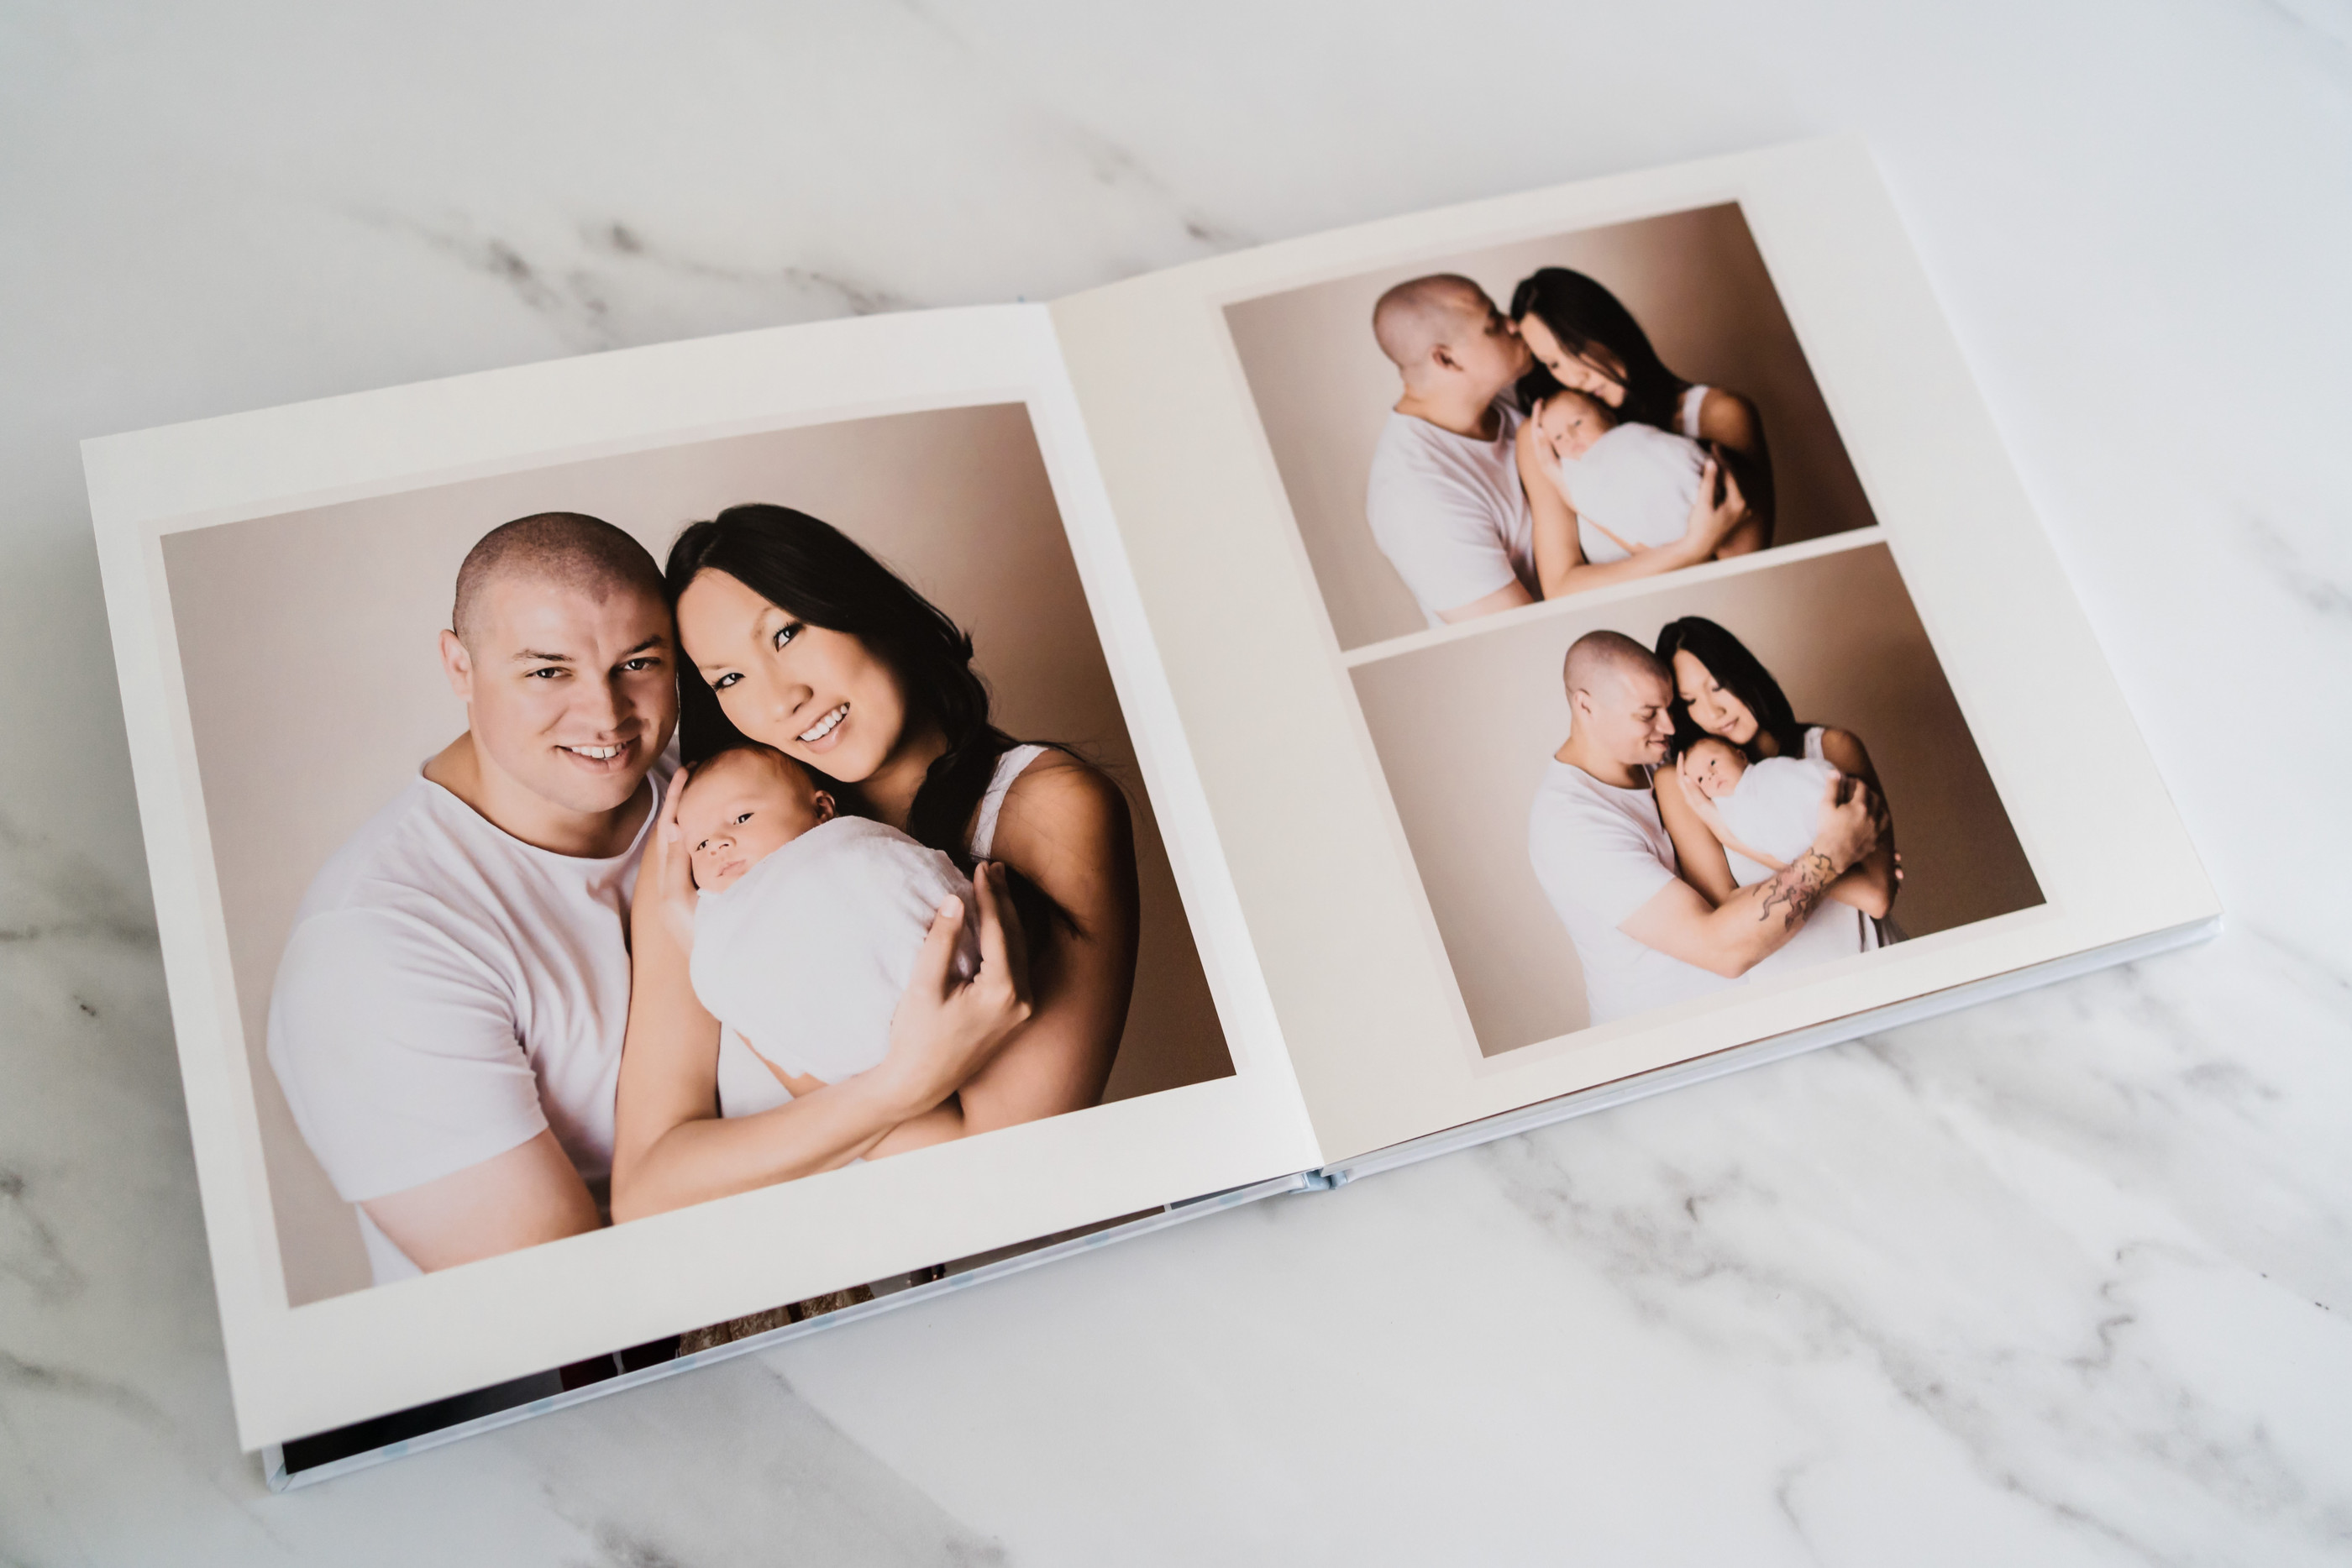 Family photo album showing couple with baby